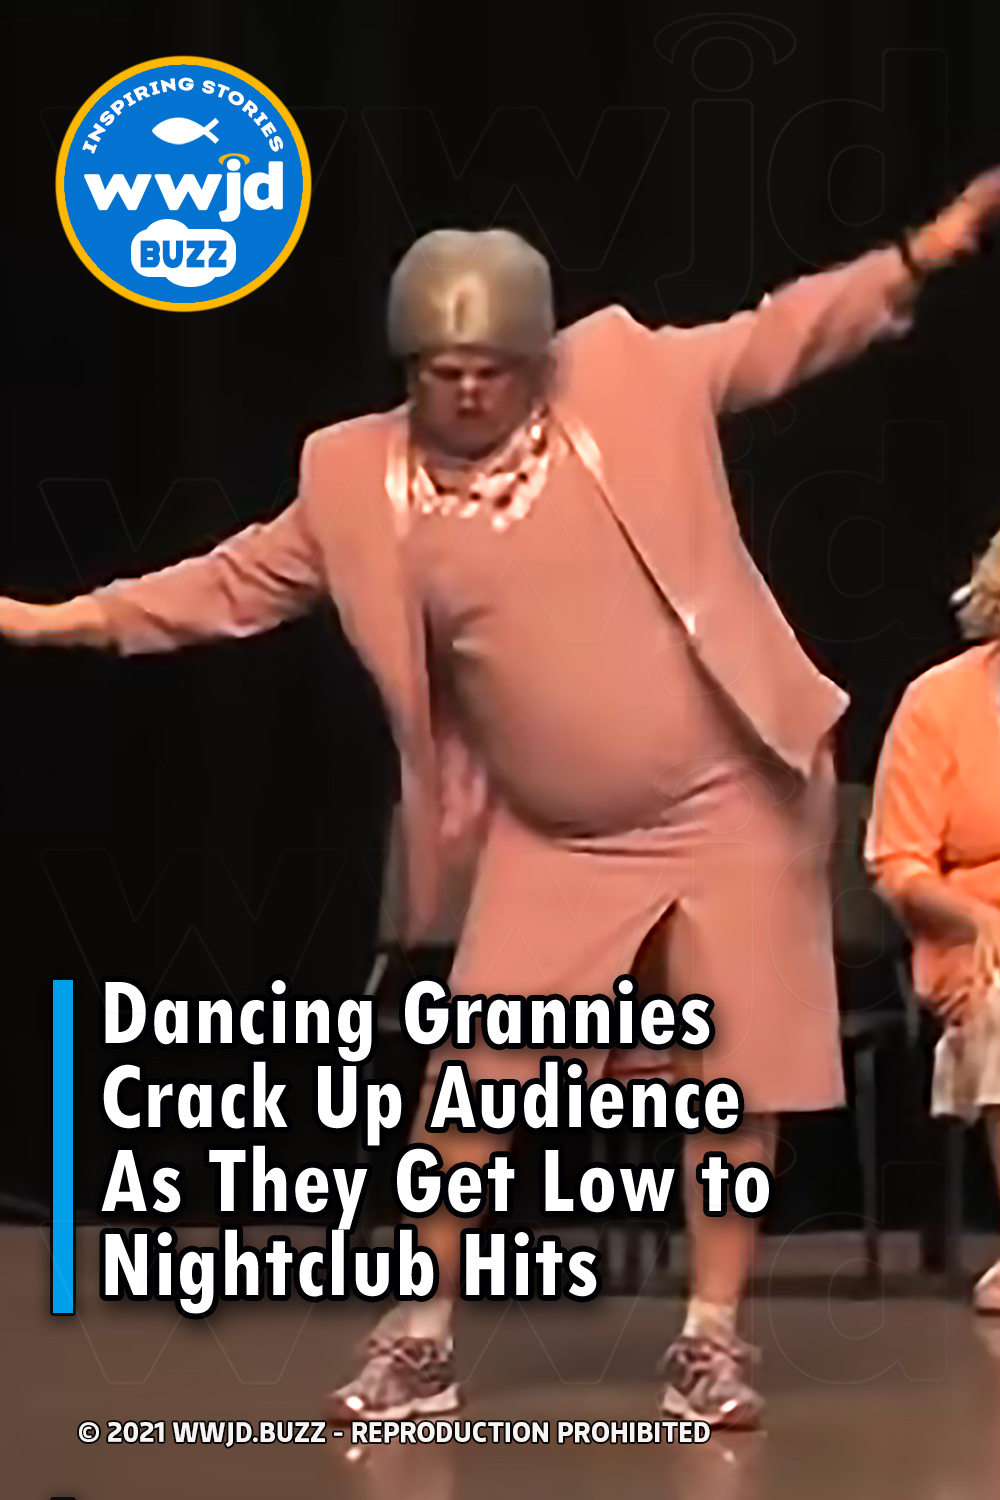 Dancing Grannies Crack Up Audience As They Get Low to Nightclub Hits